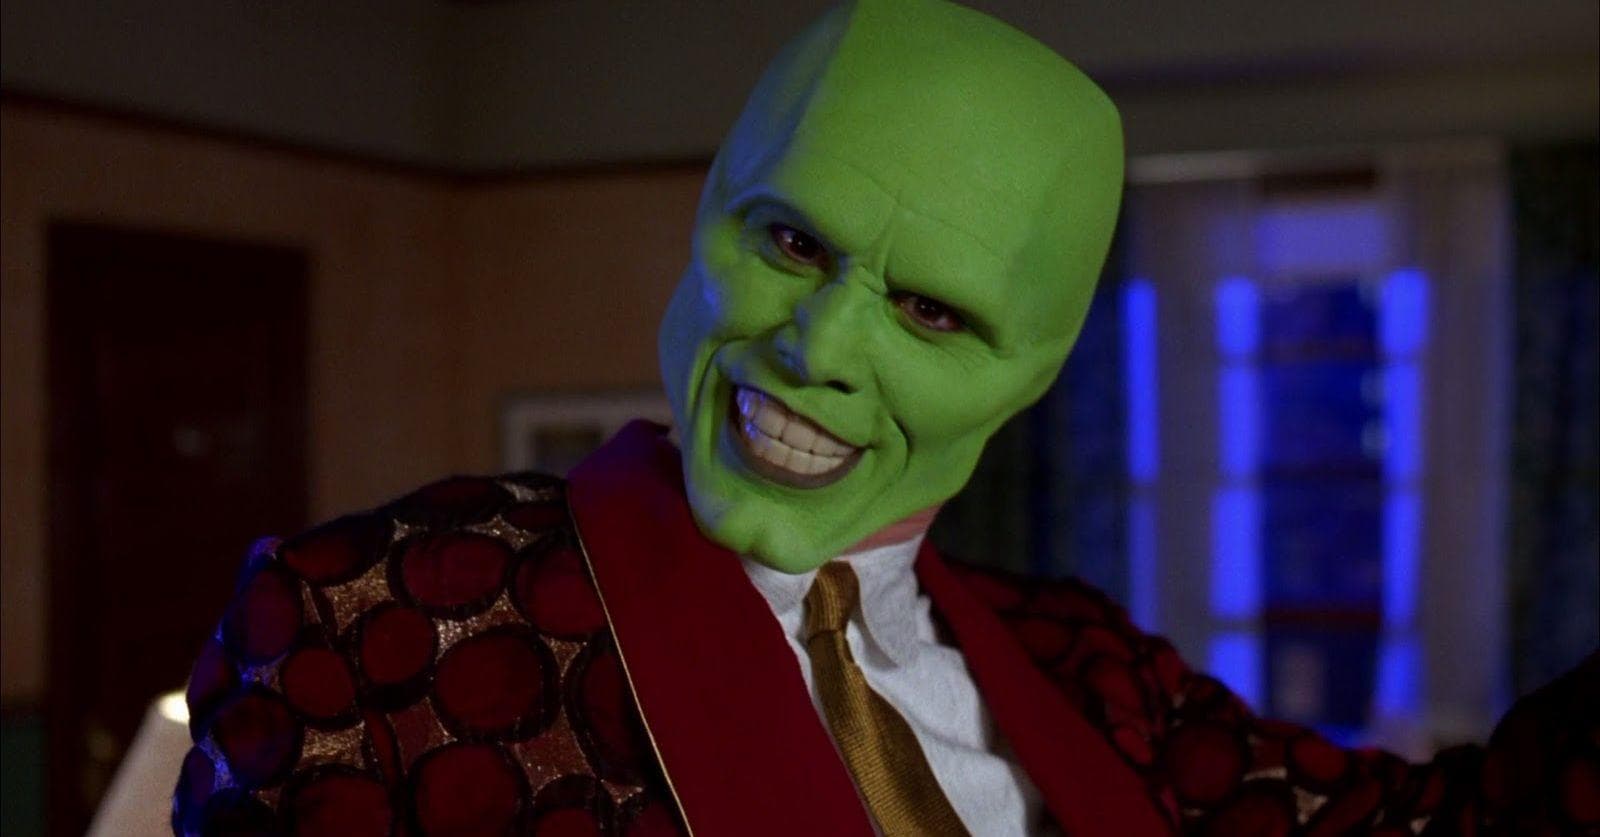 The Best Quotes From 'The Mask,' Ranked by Fans